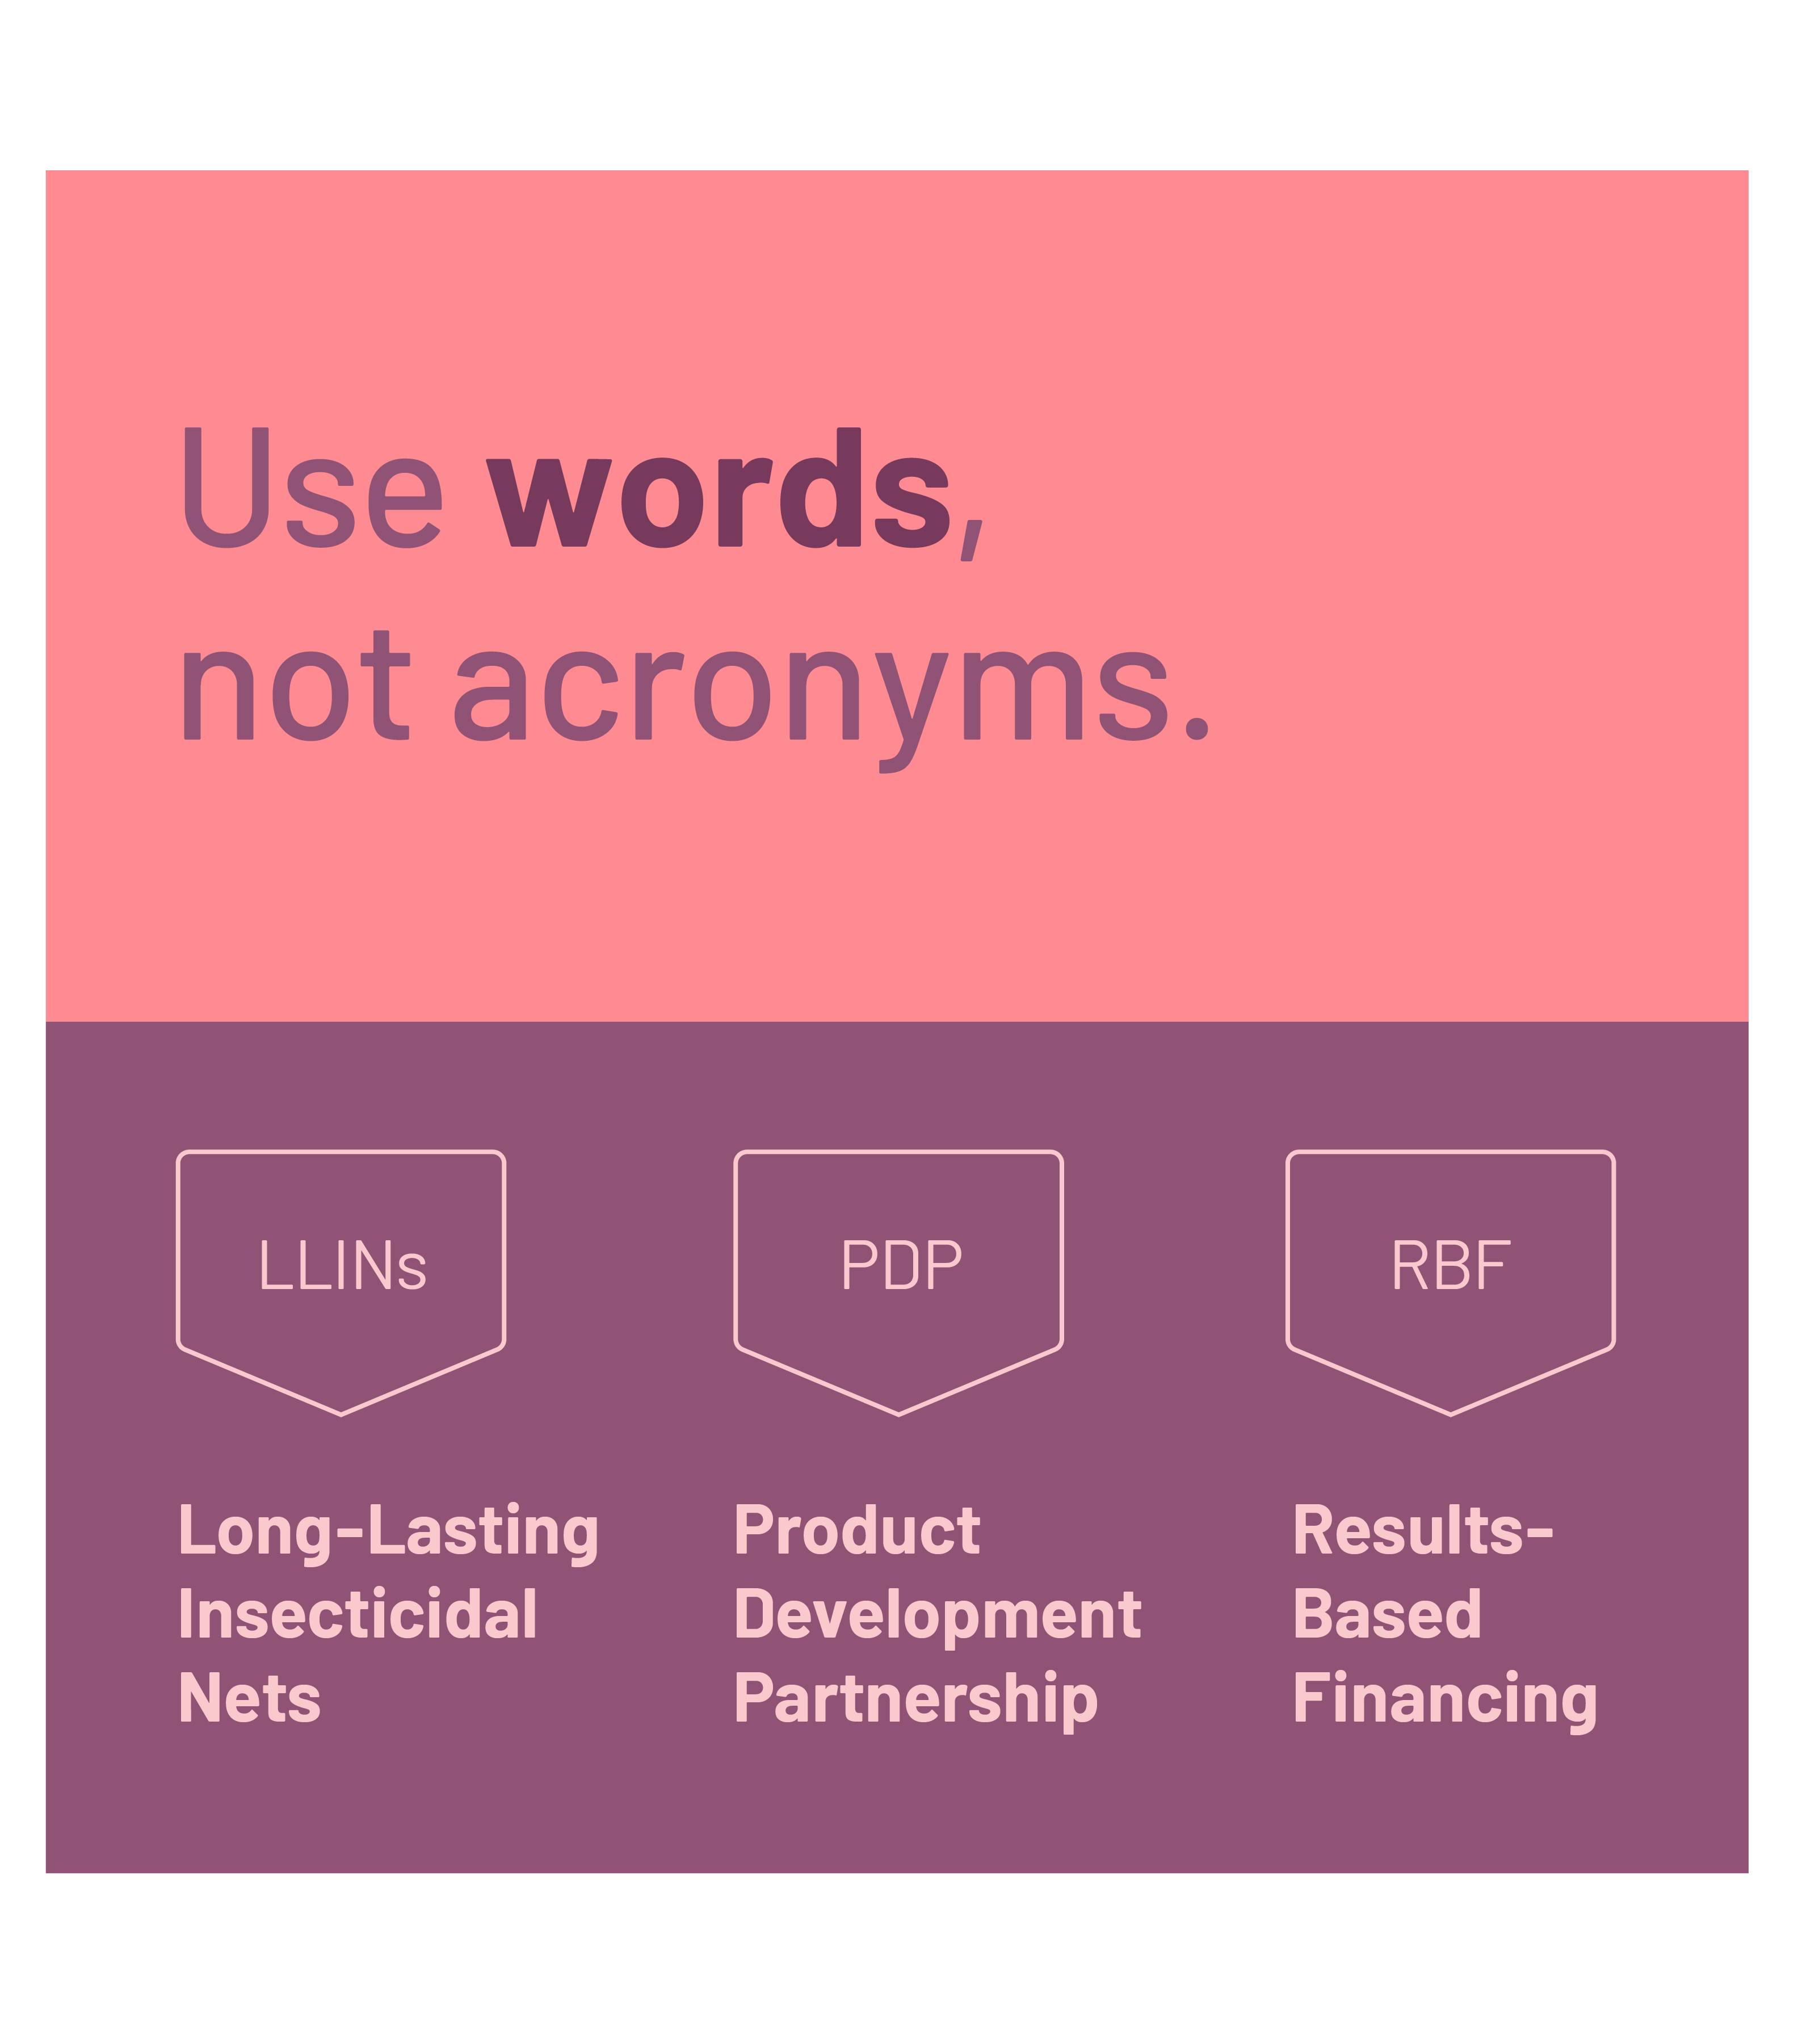 Use words, not acronyms, with example